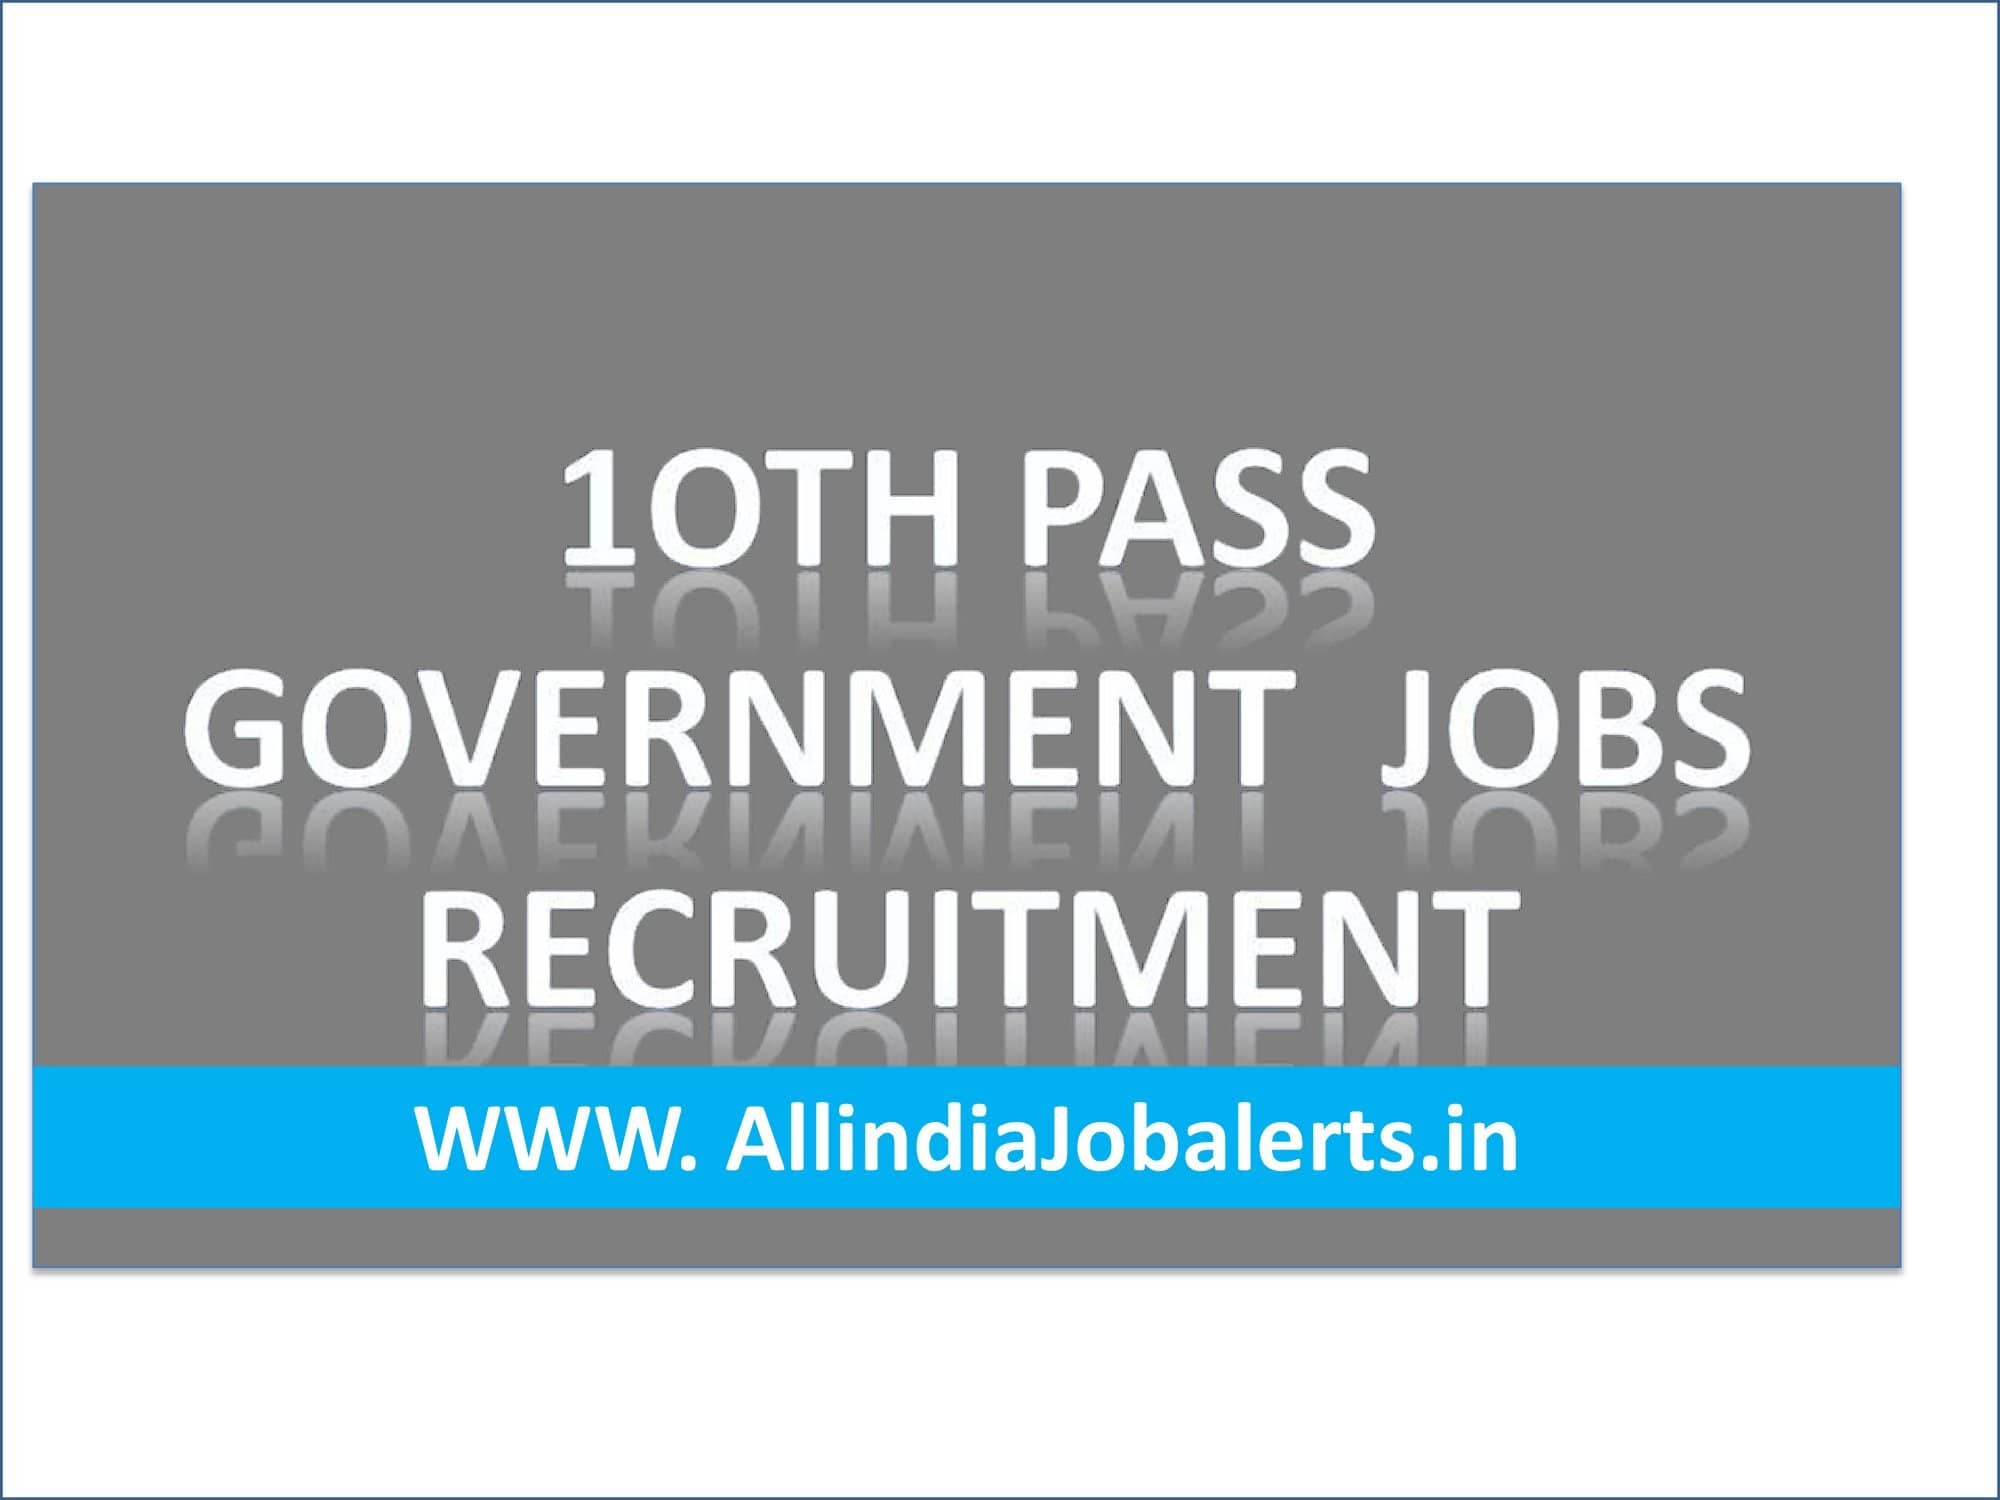 10th Pass Government Jobs